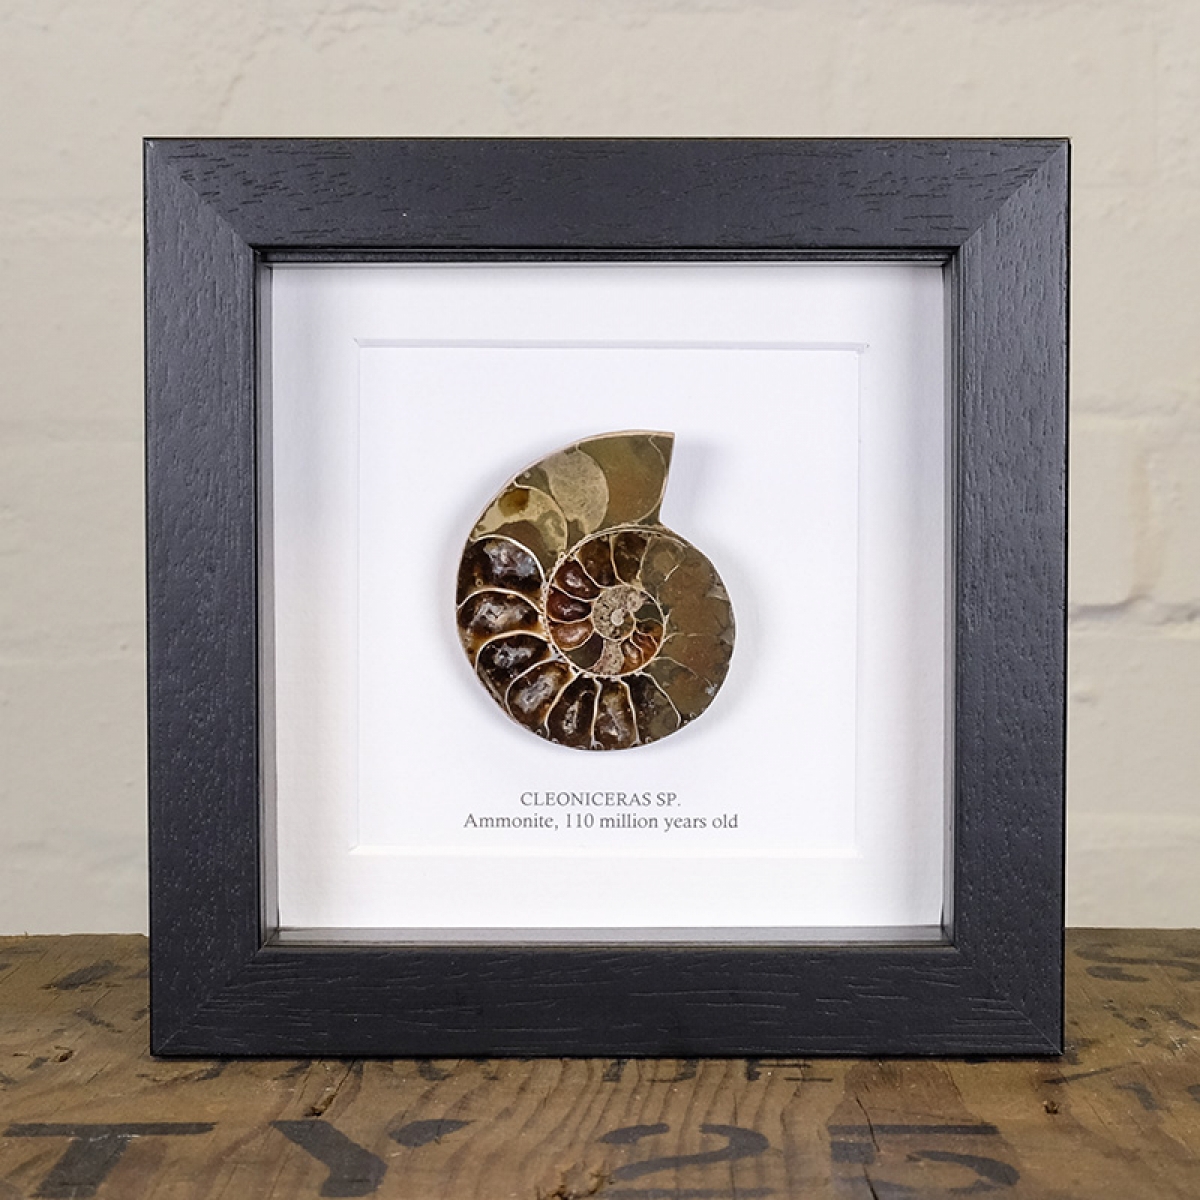 Minibeast 4-5cm Ammonite Cut and Polished Fossil in Box Frame (Cleoniceras sp) -  Specimen #02